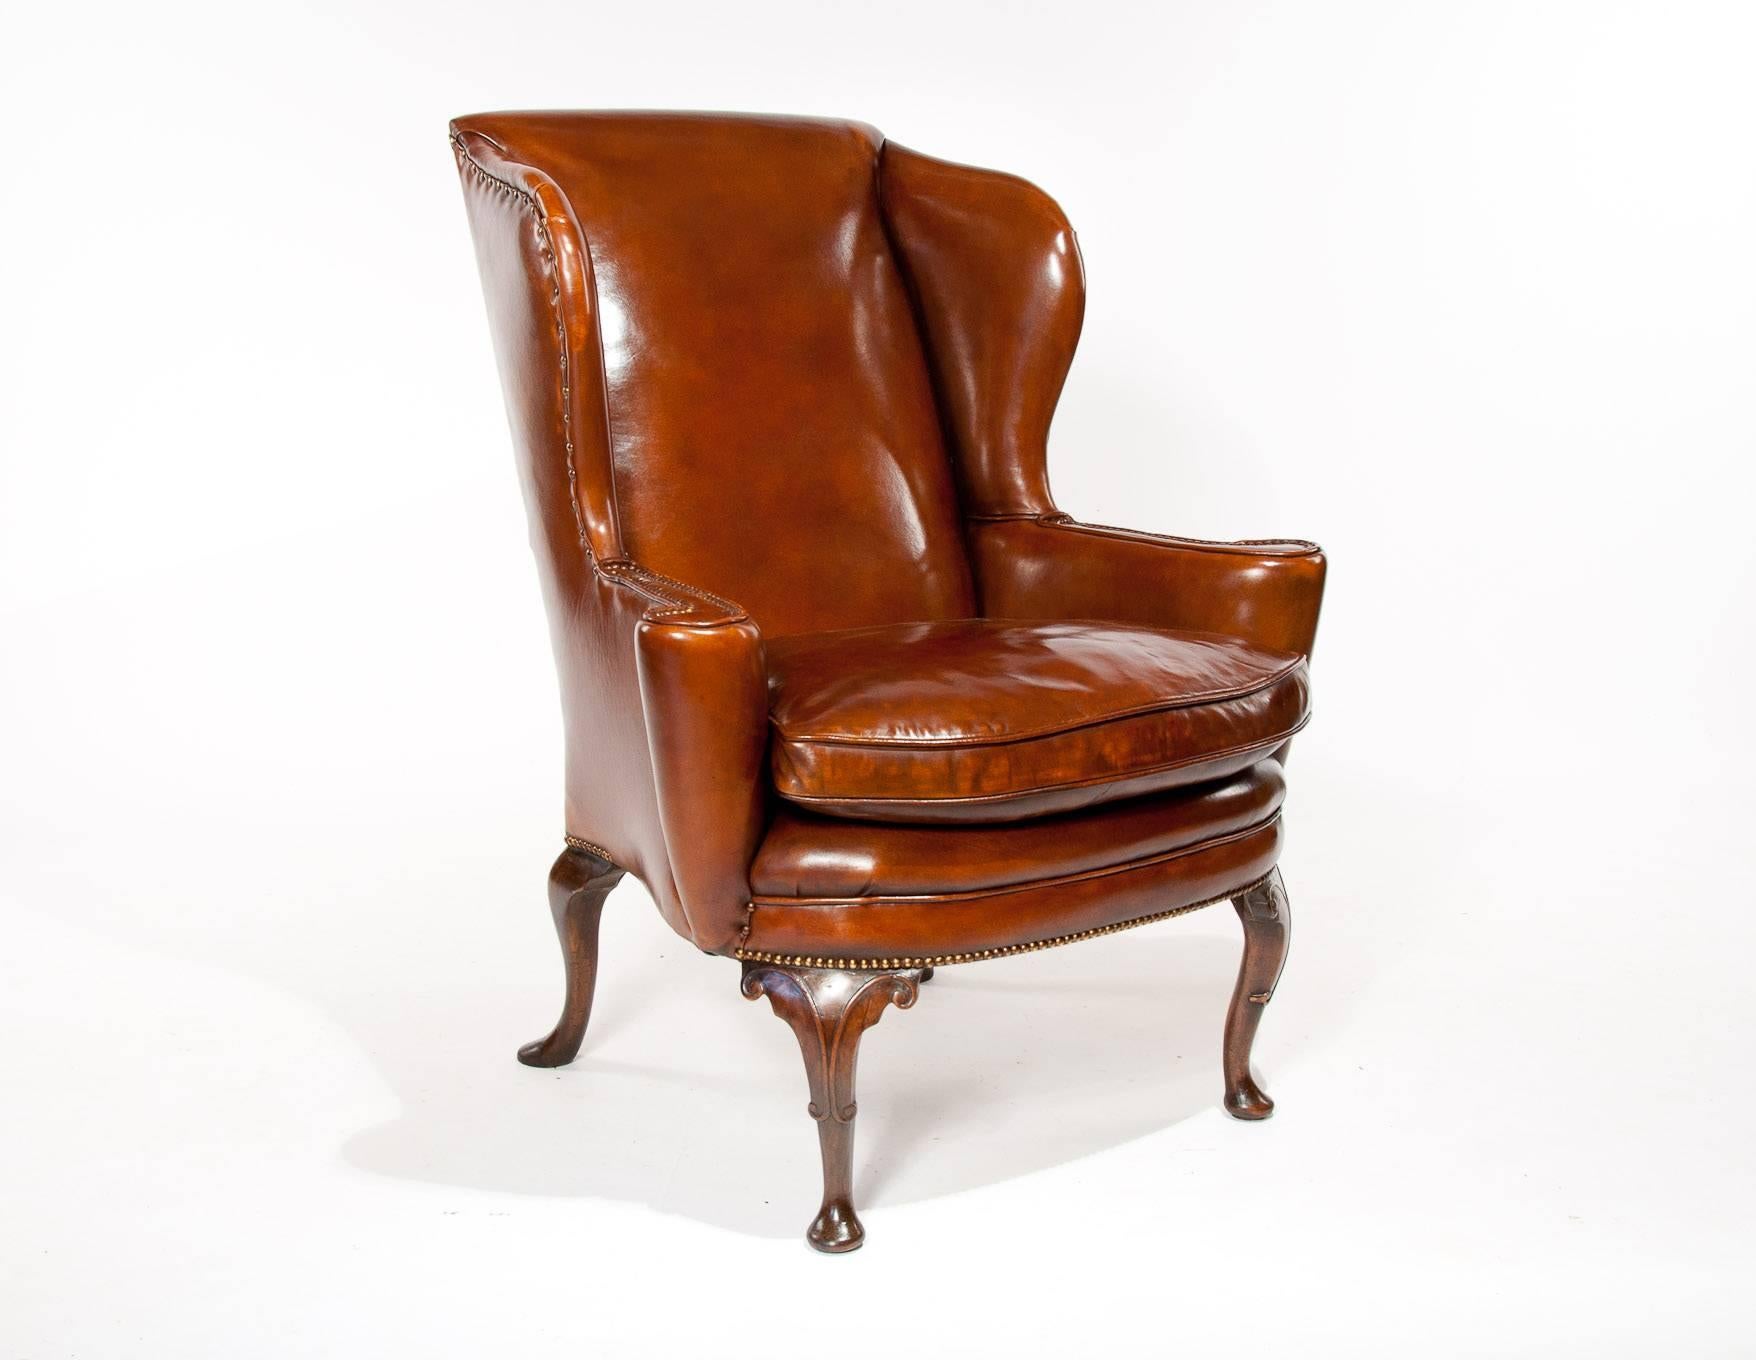 Superb quality antique walnut leather upholstered wing chair, mid-19th century having wonderful proportions. This fine quality antique leather wing chair has a very elegant shape with great proportions having an imposing size and a feather cushion